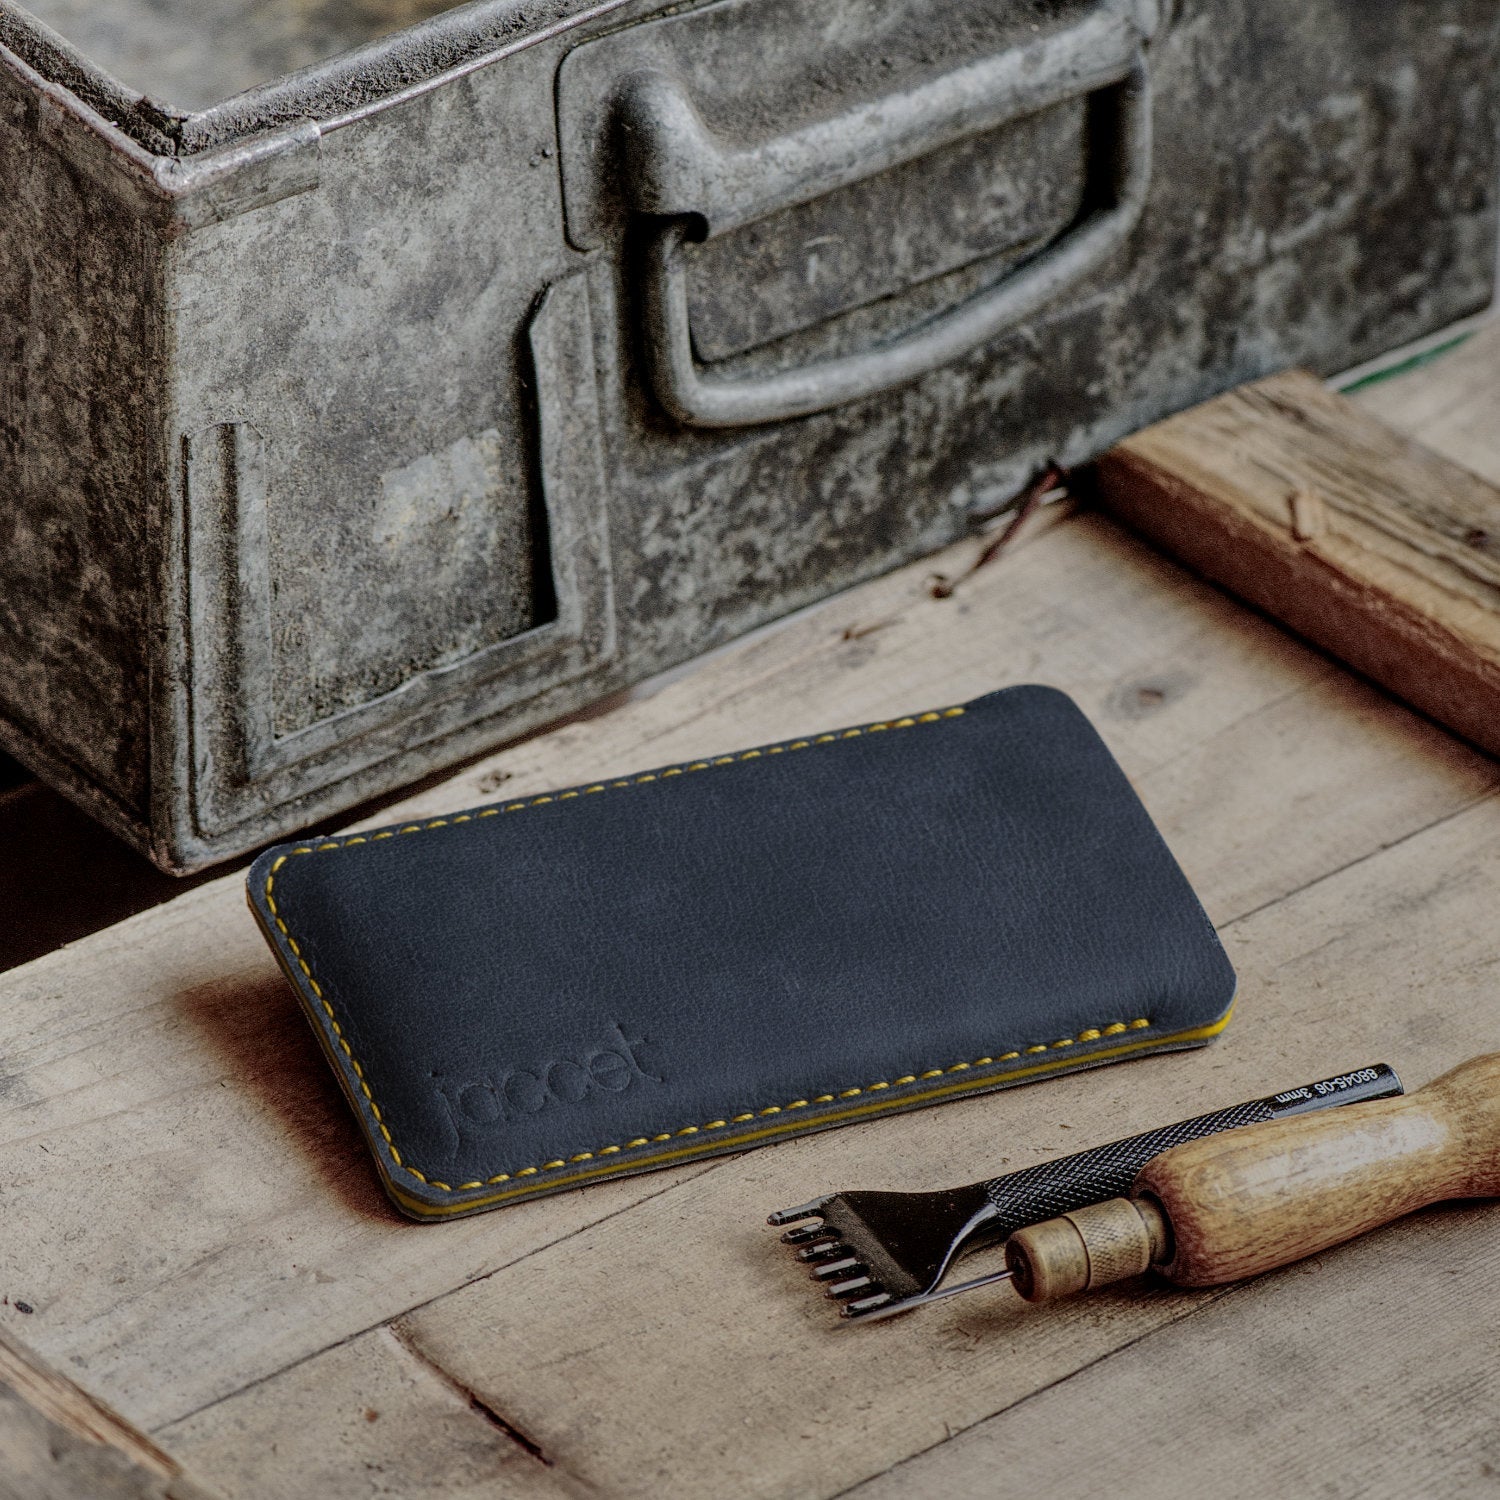 JACCET leather OnePlus sleeve - anthracite/black leather with yellow wool felt. 100% Handmade